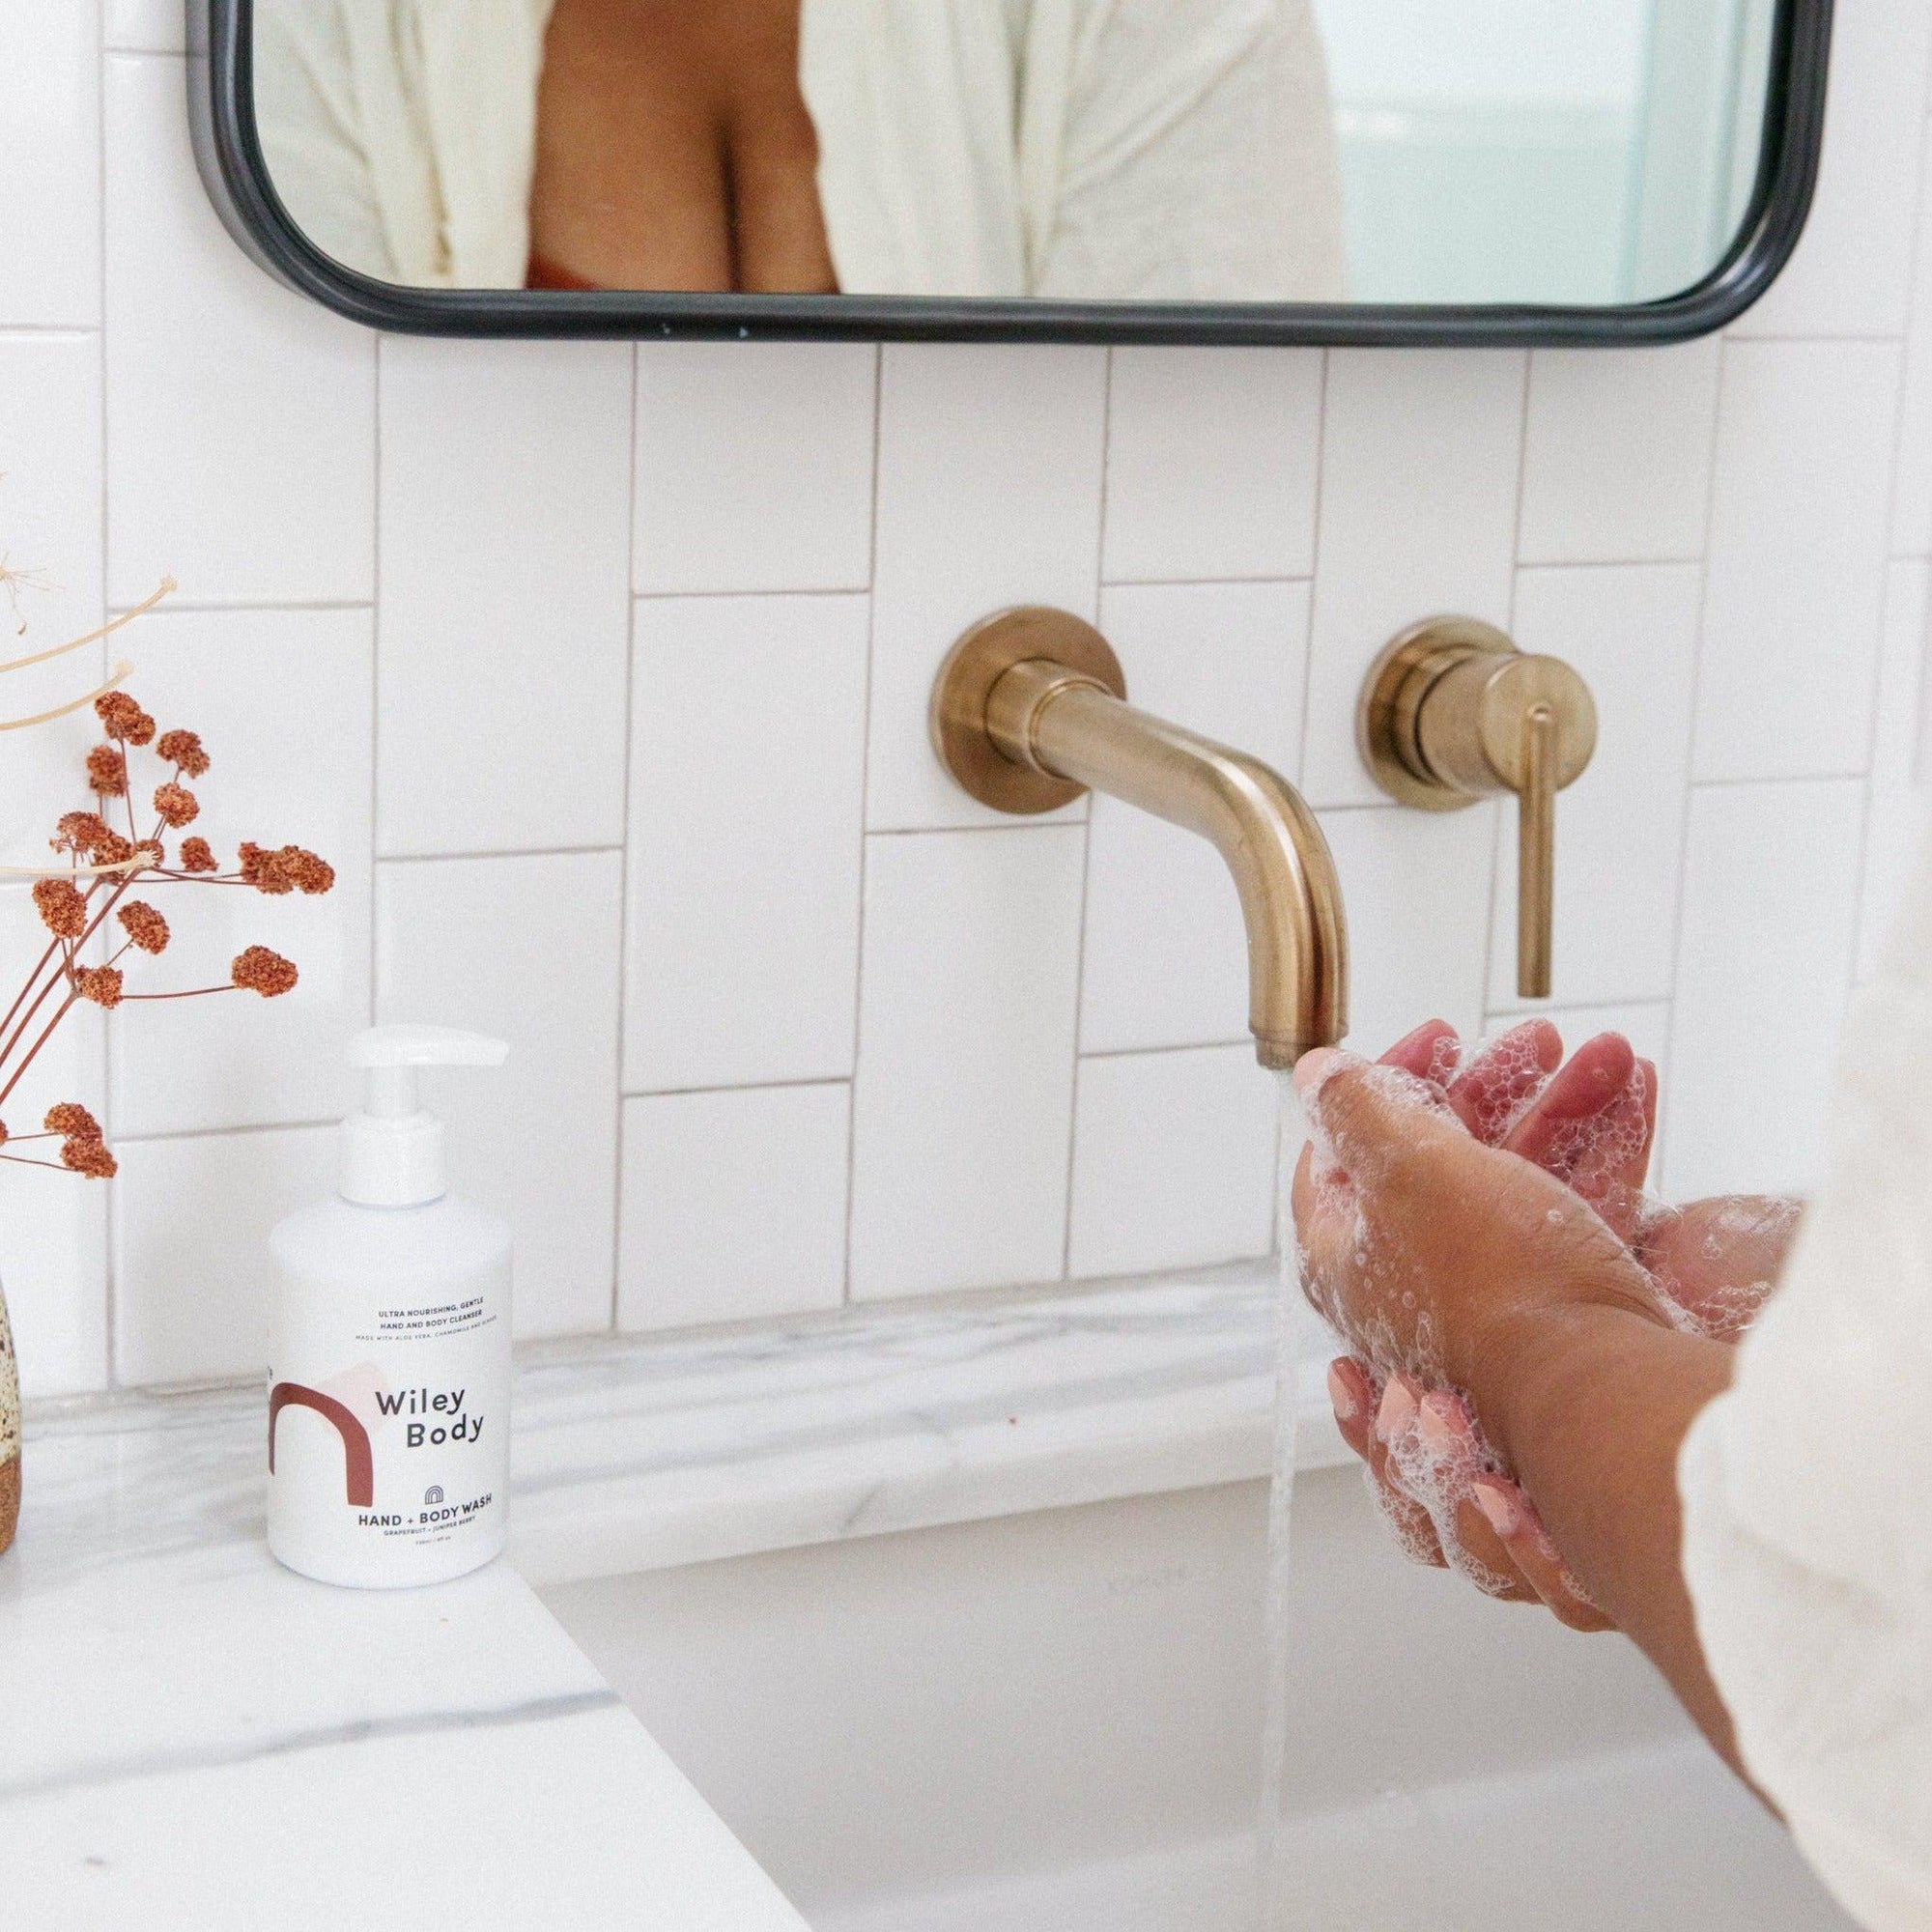 A woman using Wiley Body organic hand & body wash to cleanse her hands in front of a mirror.